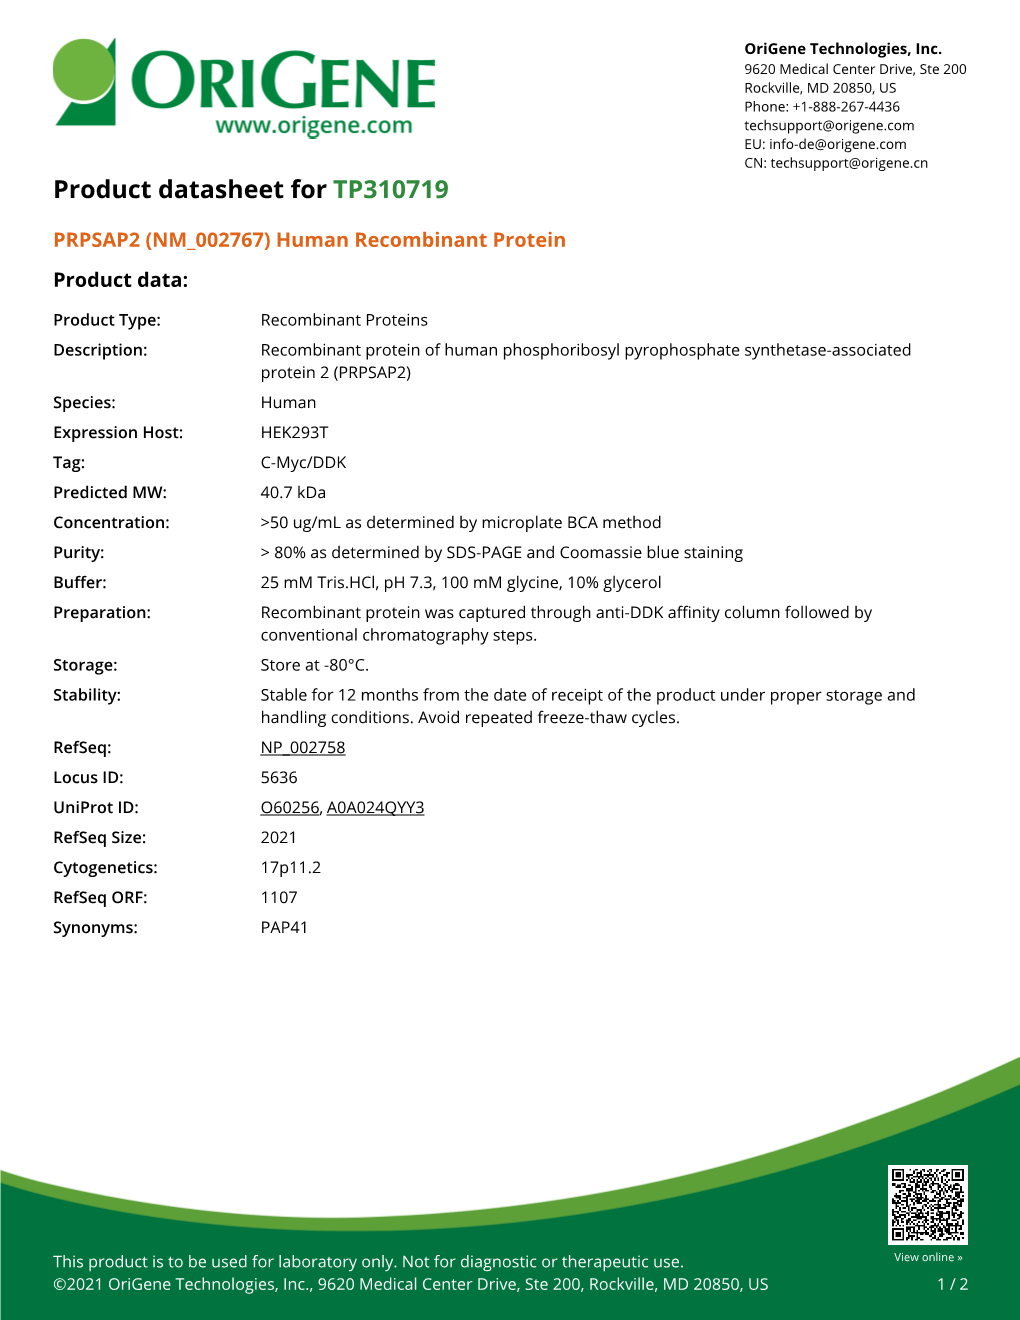 PRPSAP2 (NM 002767) Human Recombinant Protein – TP310719